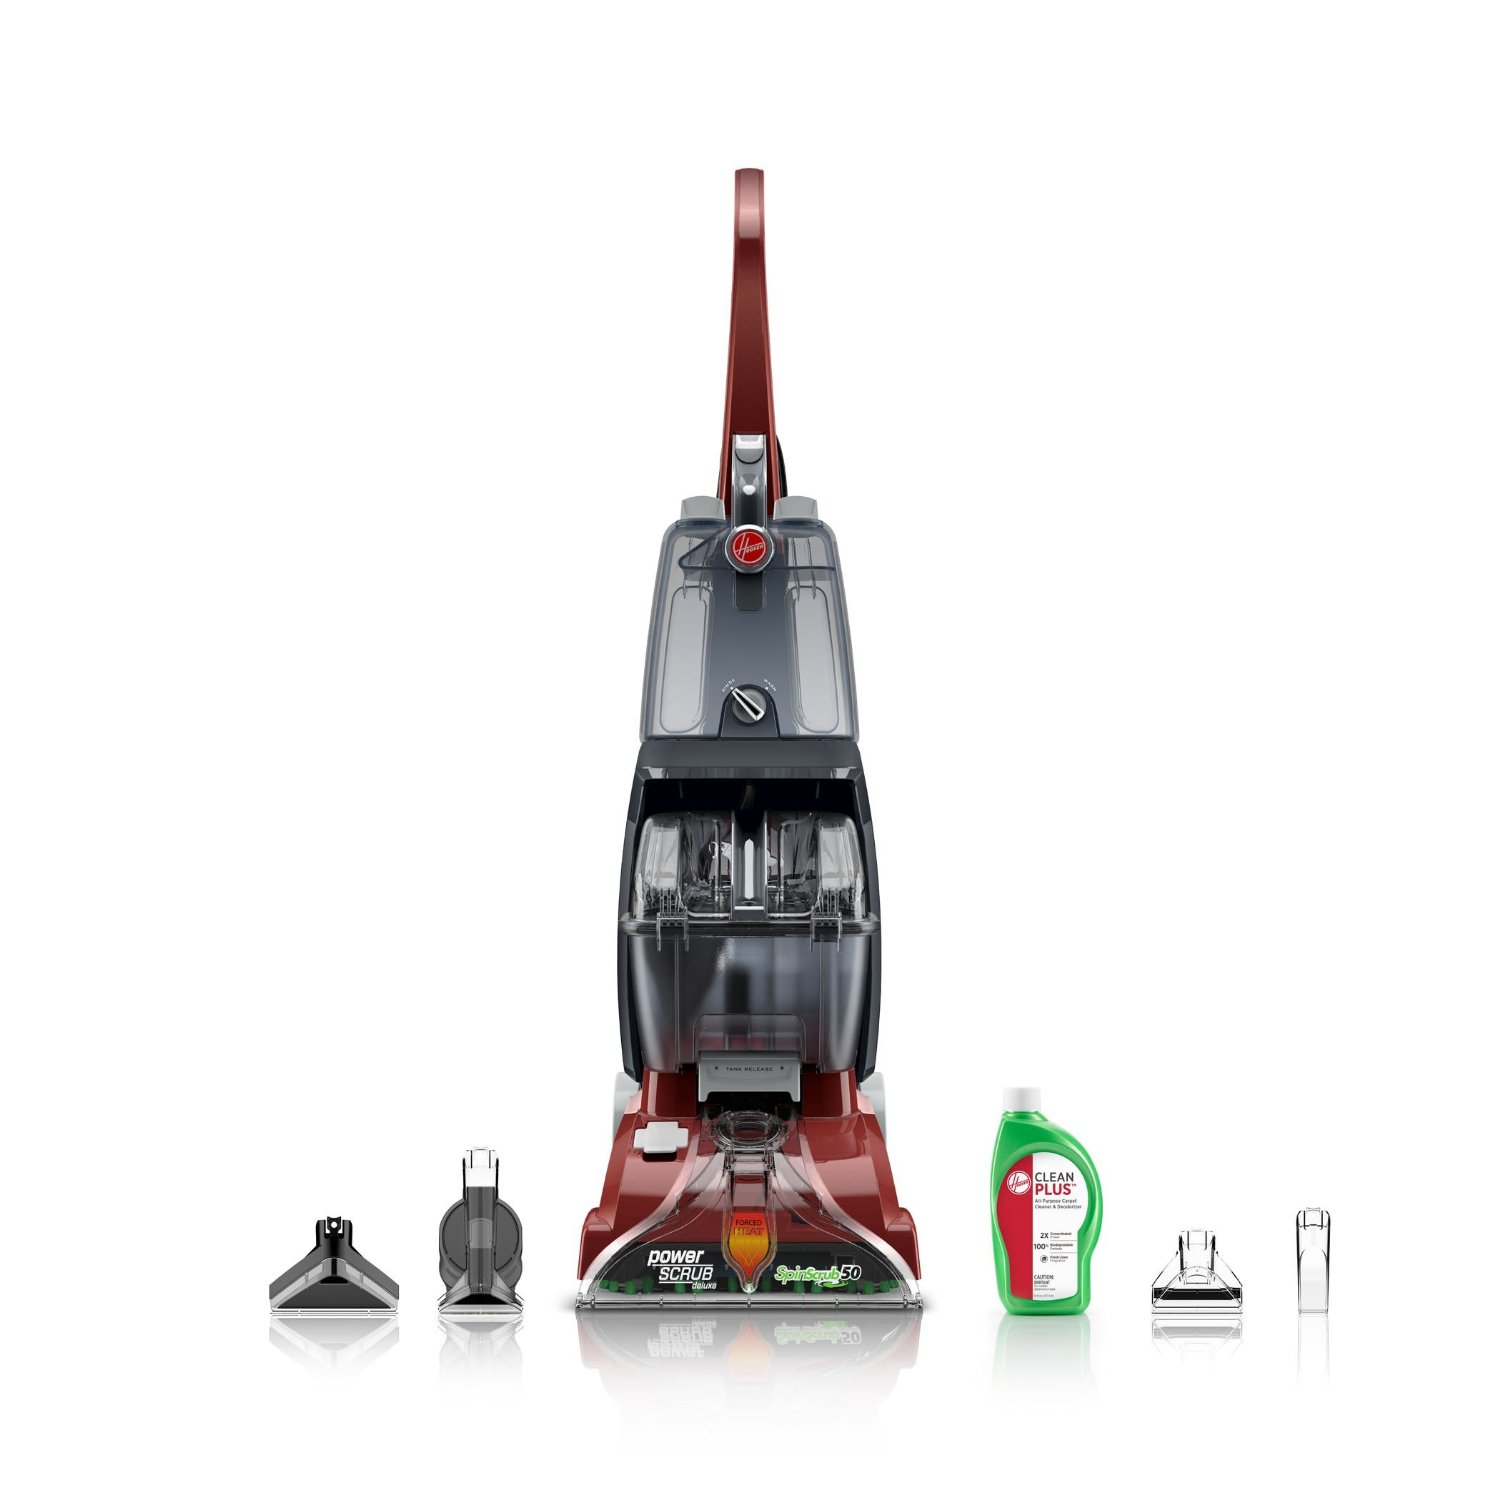 Hoover Power Scrub Deluxe Carpet Washer Only $109.00 – 50% Off!!